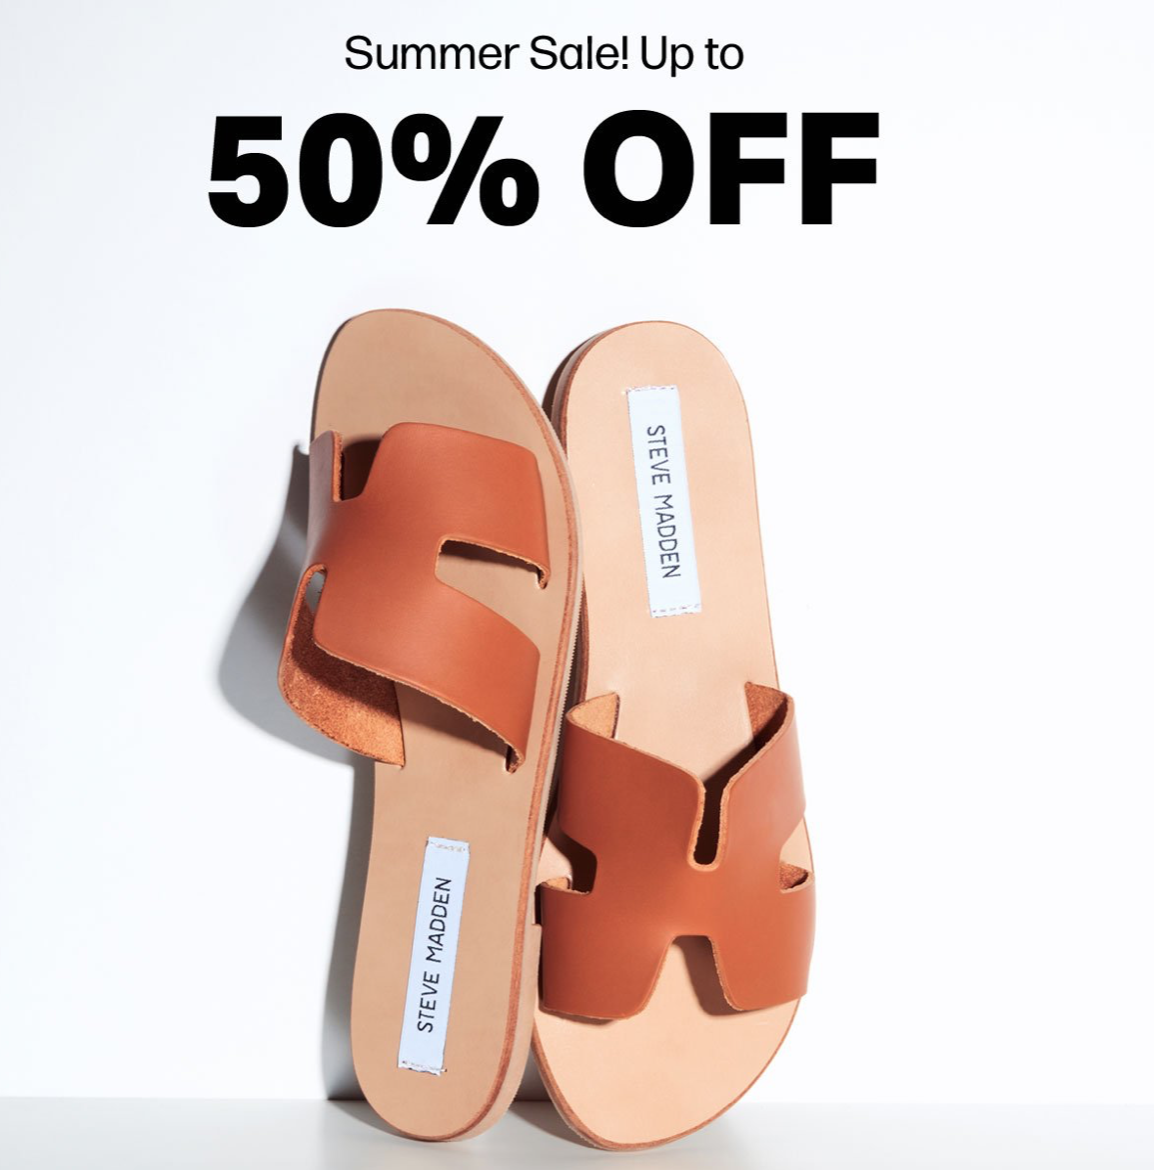 Steve Madden Canada Sale: to 50% Off Footwear + Clearance Items From $19 & FREE - Canadian Freebies, Coupons, Bargains, Flyers, Contests Canada Canadian Freebies, Coupons, Deals, Bargains, Contests Canada